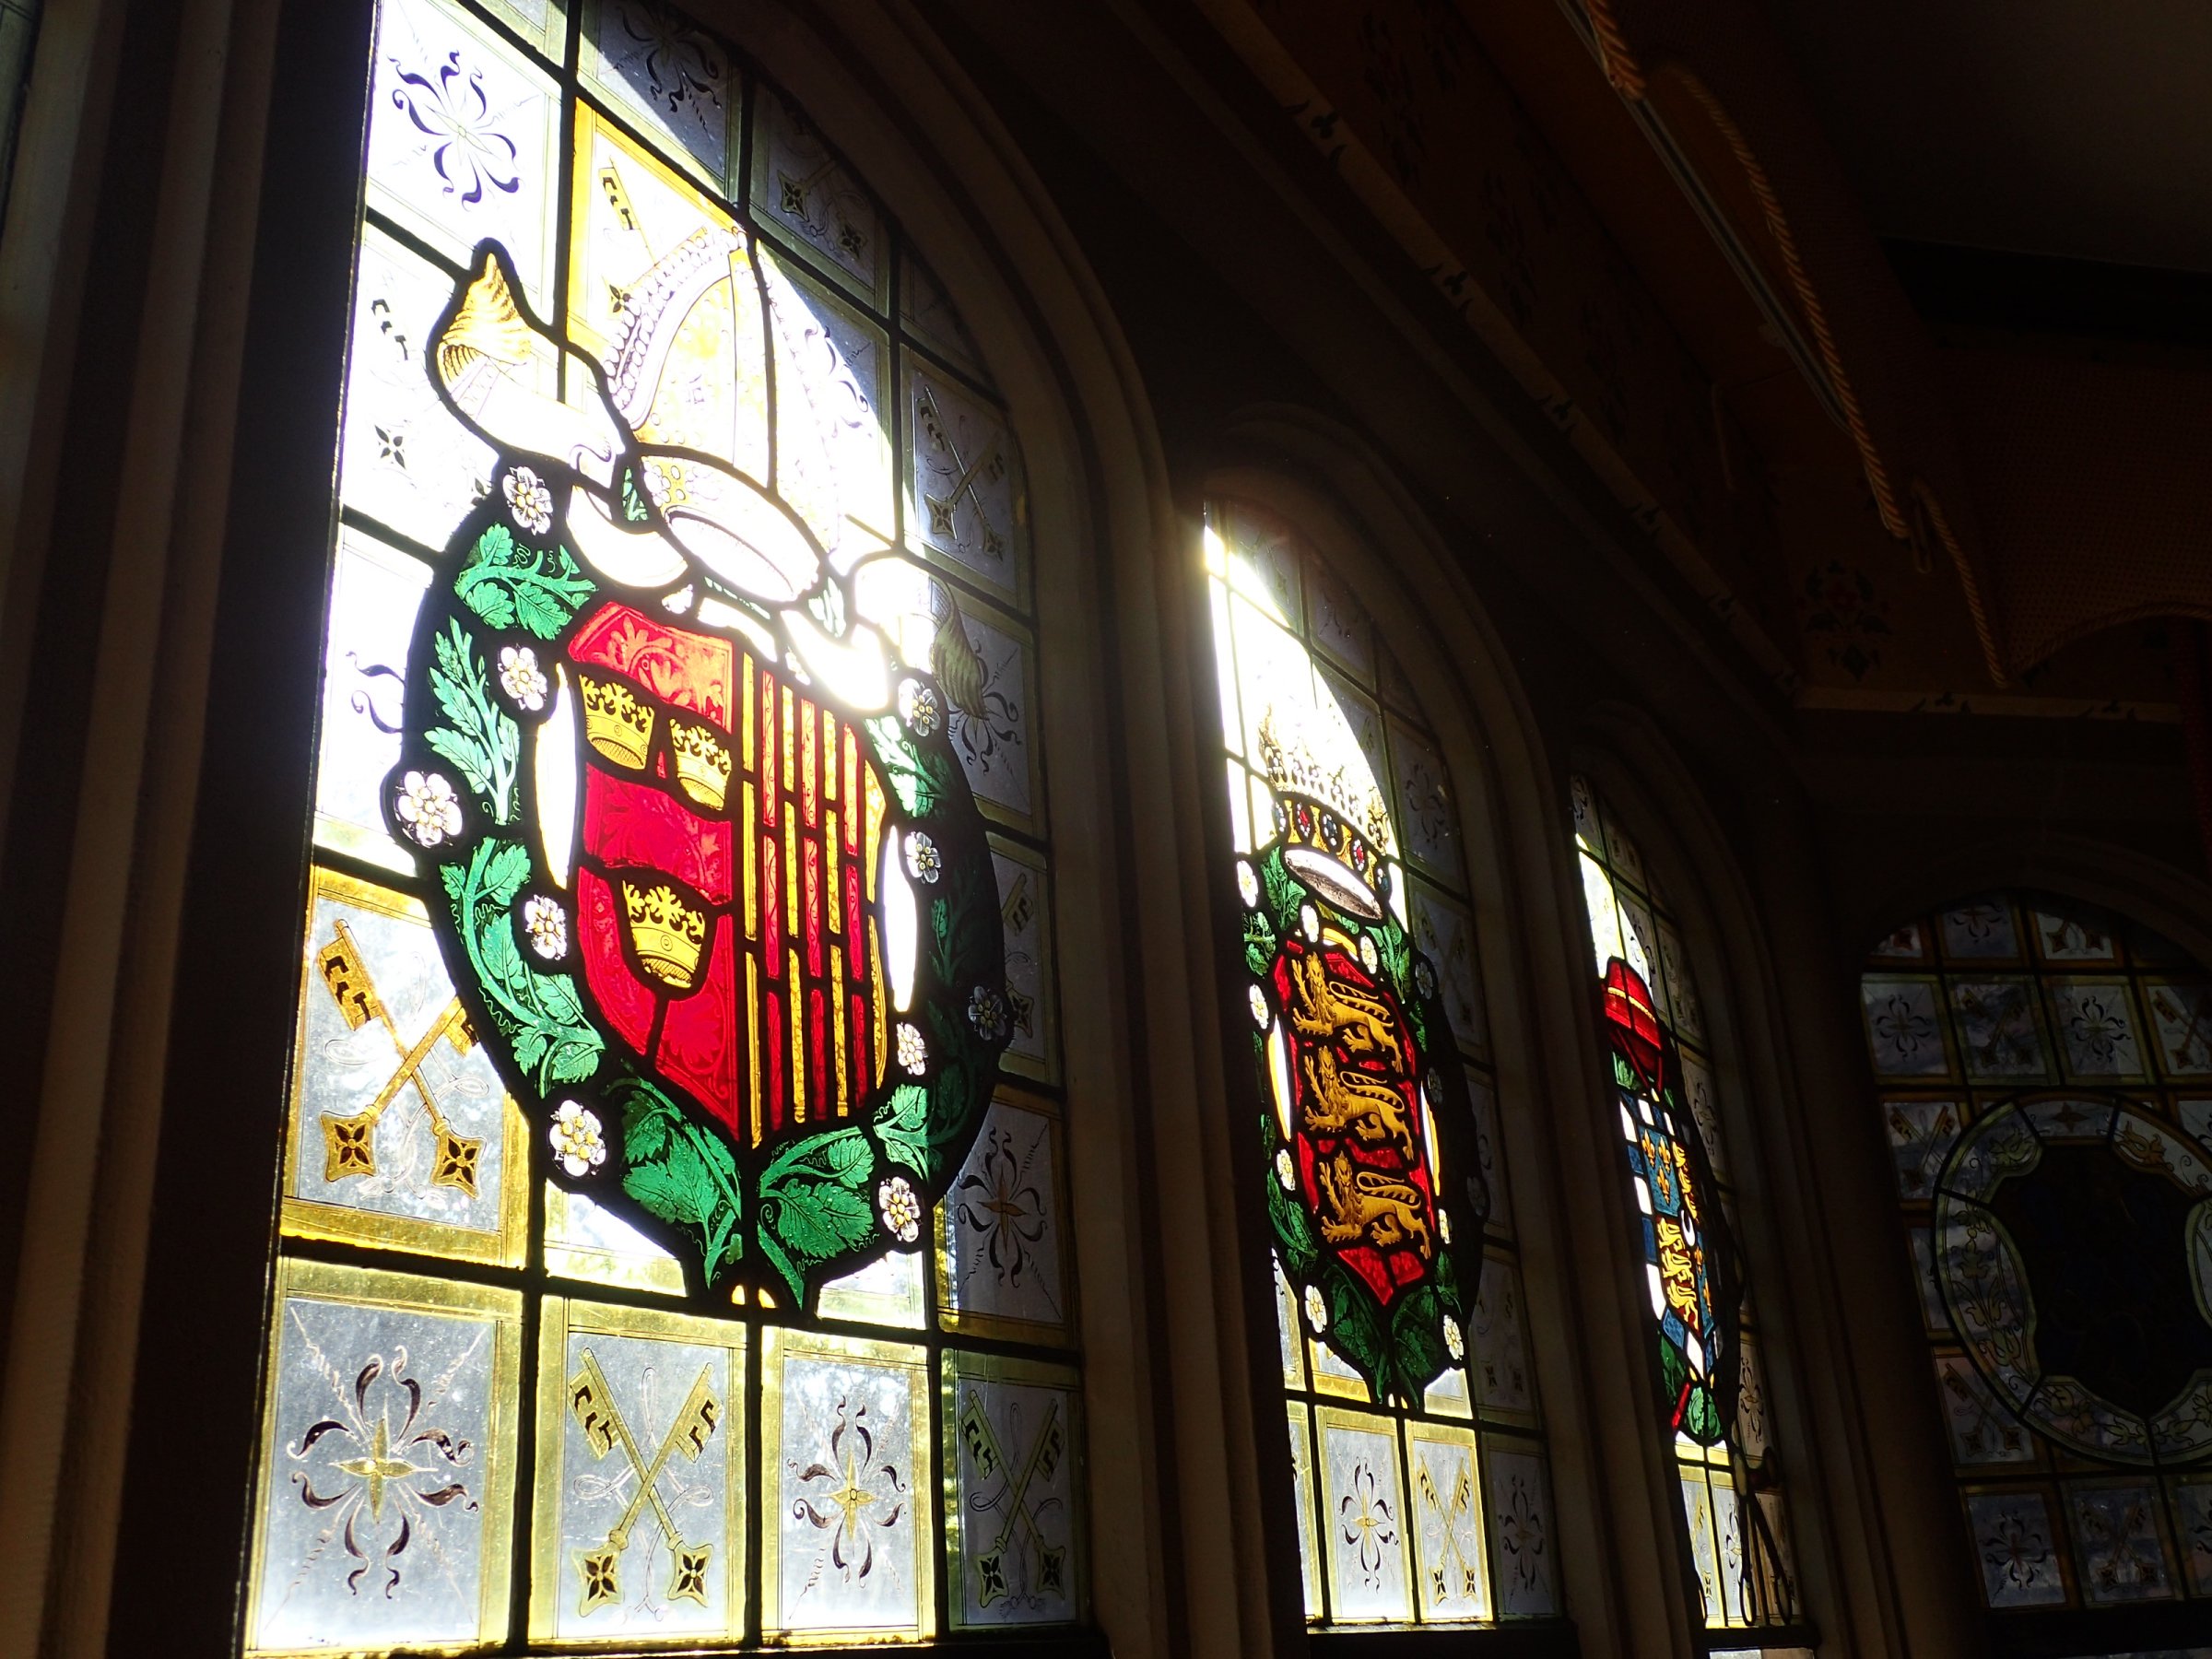 Stained glass window in the Upper Parlour